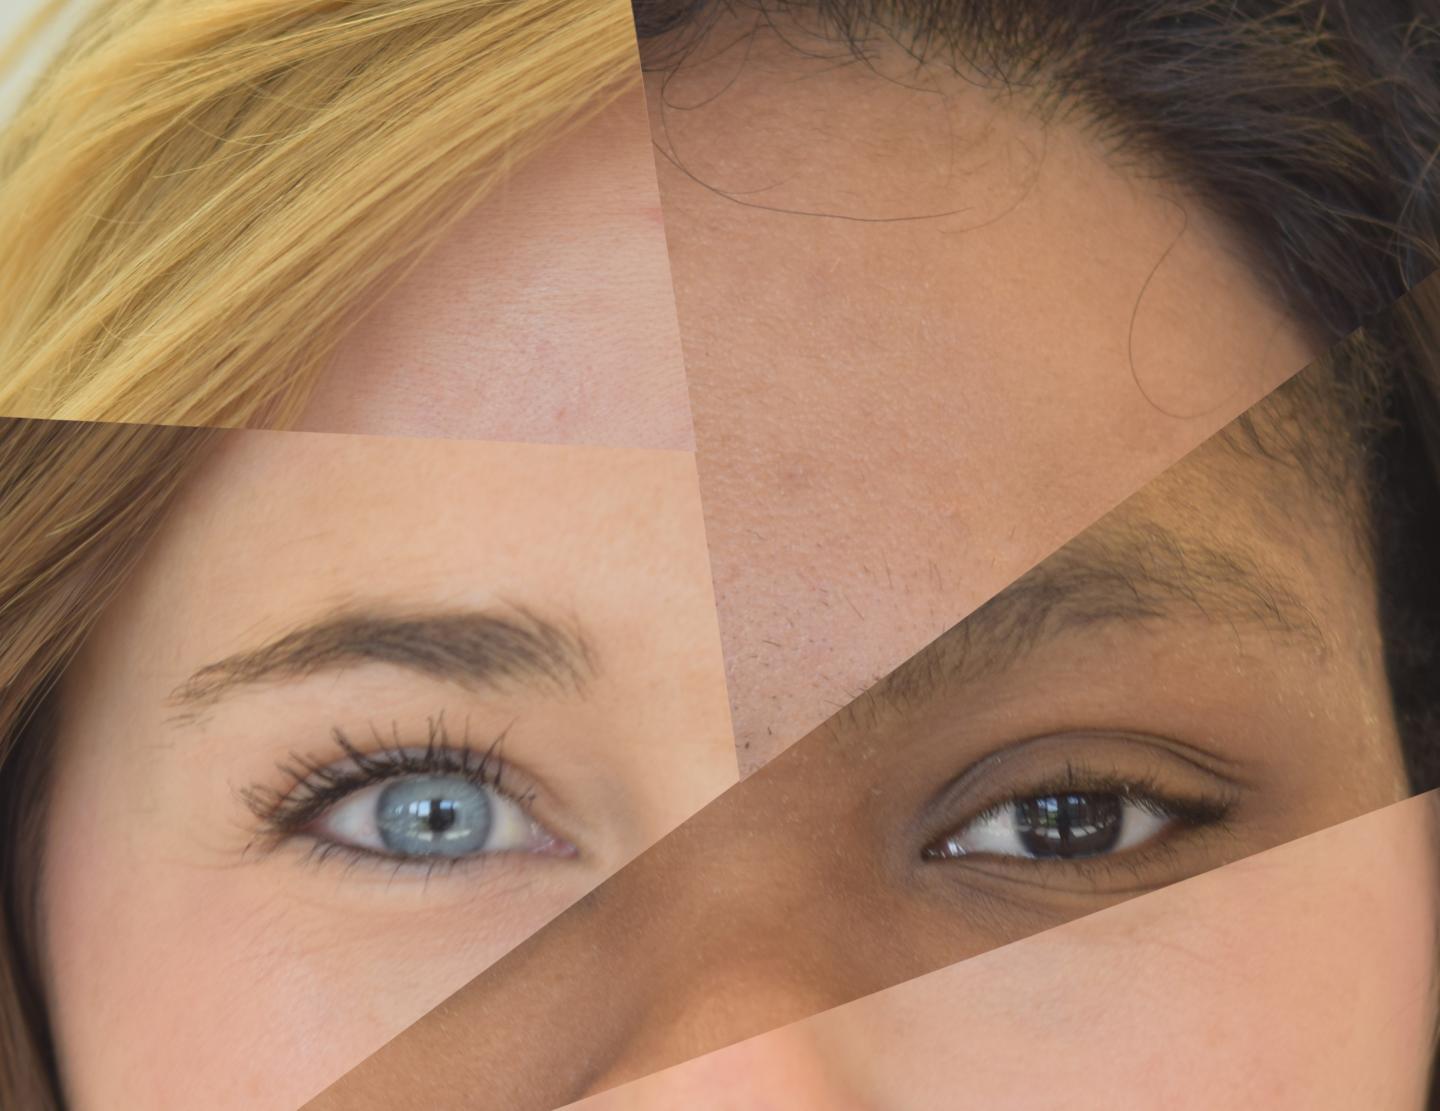 An international team, led by scientists from the School of Science at IUPUI and Erasmus MC University Medical Center Rotterdam, has developed a novel tool to accurately predict eye, hair and skin color from human biological material. The innovative high-probability and high-accuracy complete pigmentation profile webtool is available online without charge. Source: Walsh Lab in the School of Science at IUPUI